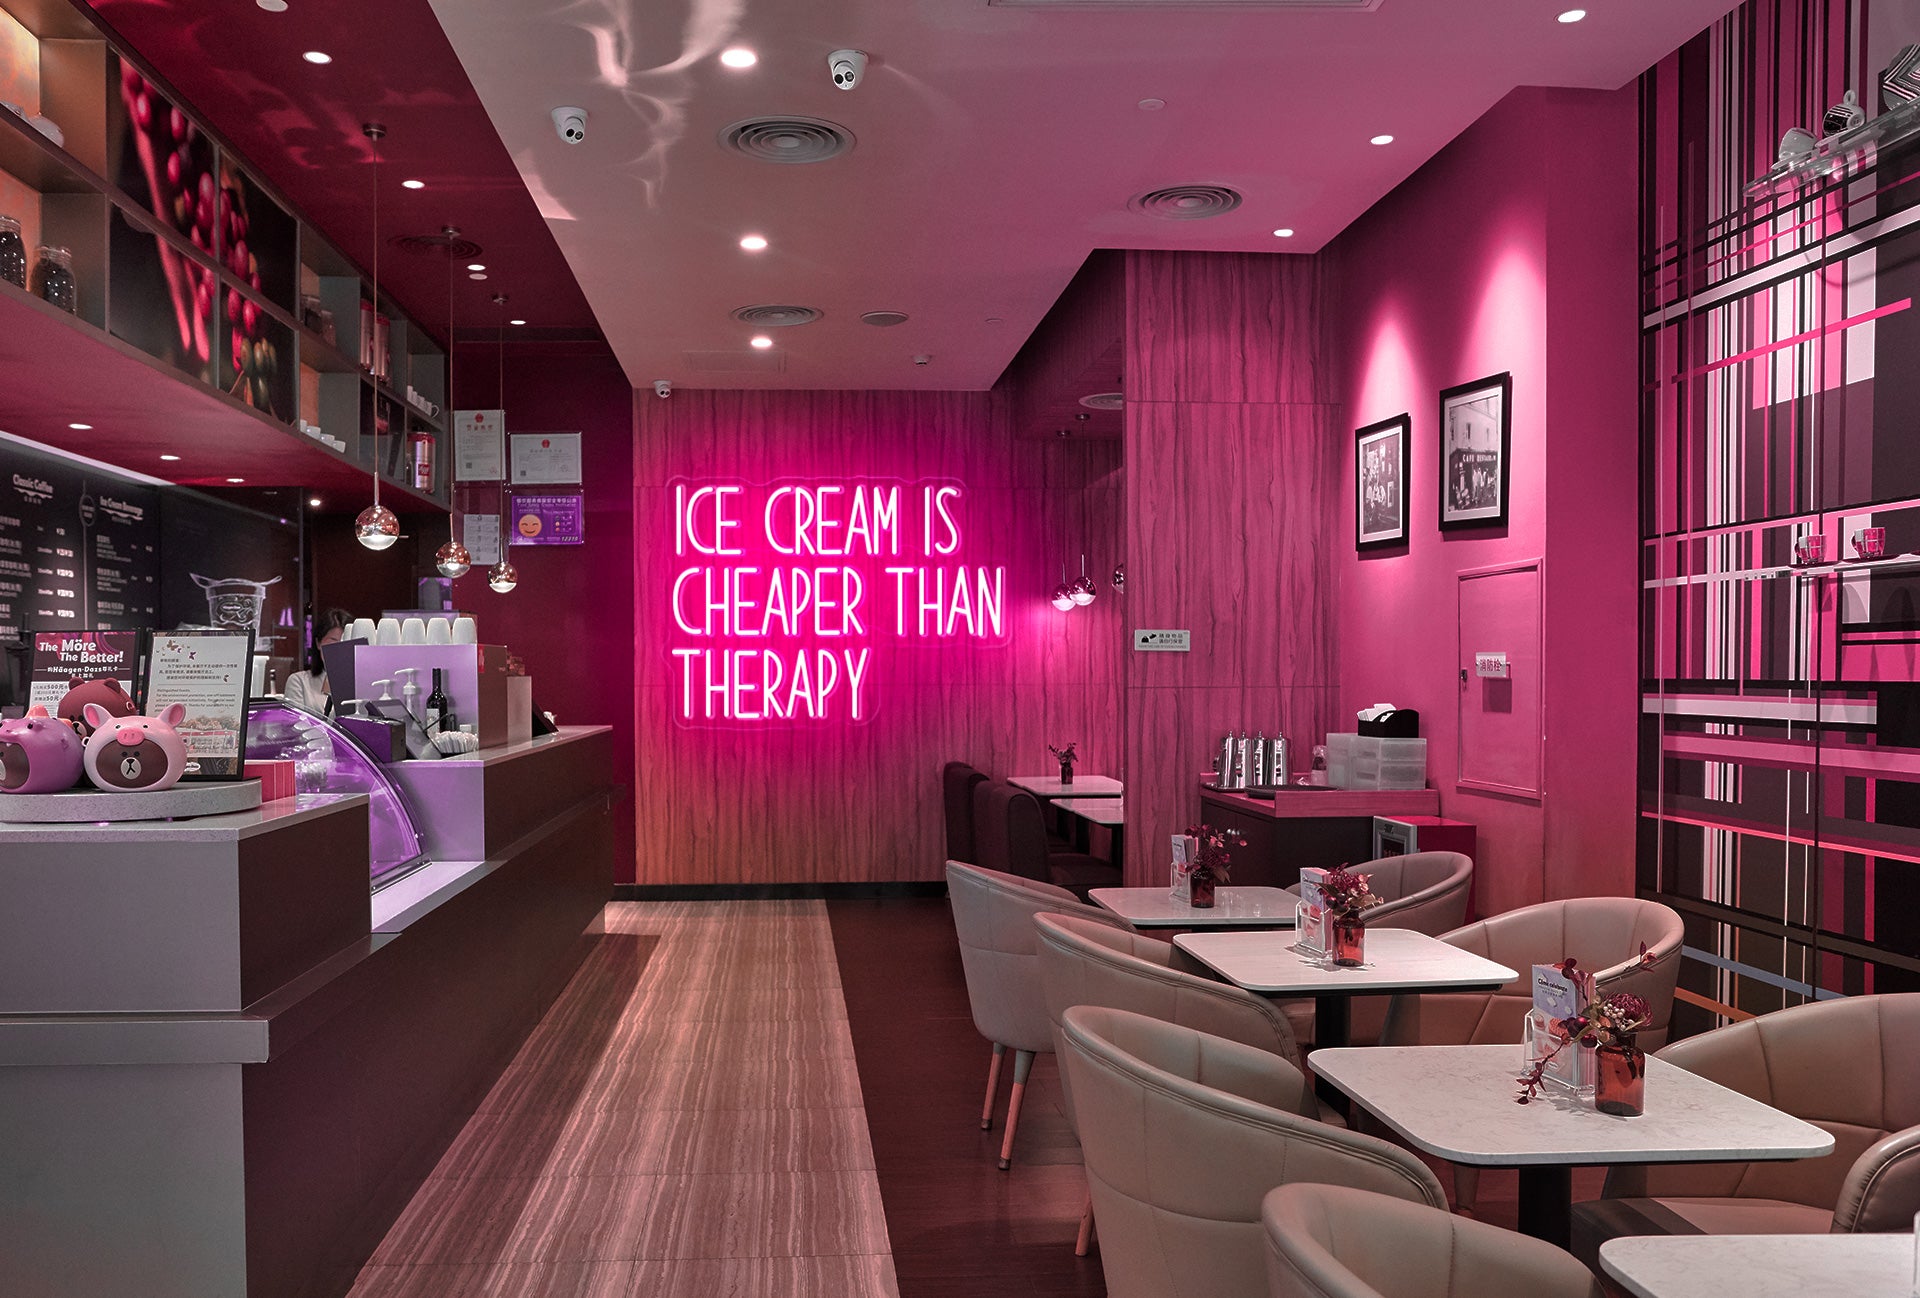 ICE CREAM  IS CHEAPER THAN HTERAPY Neon wall art